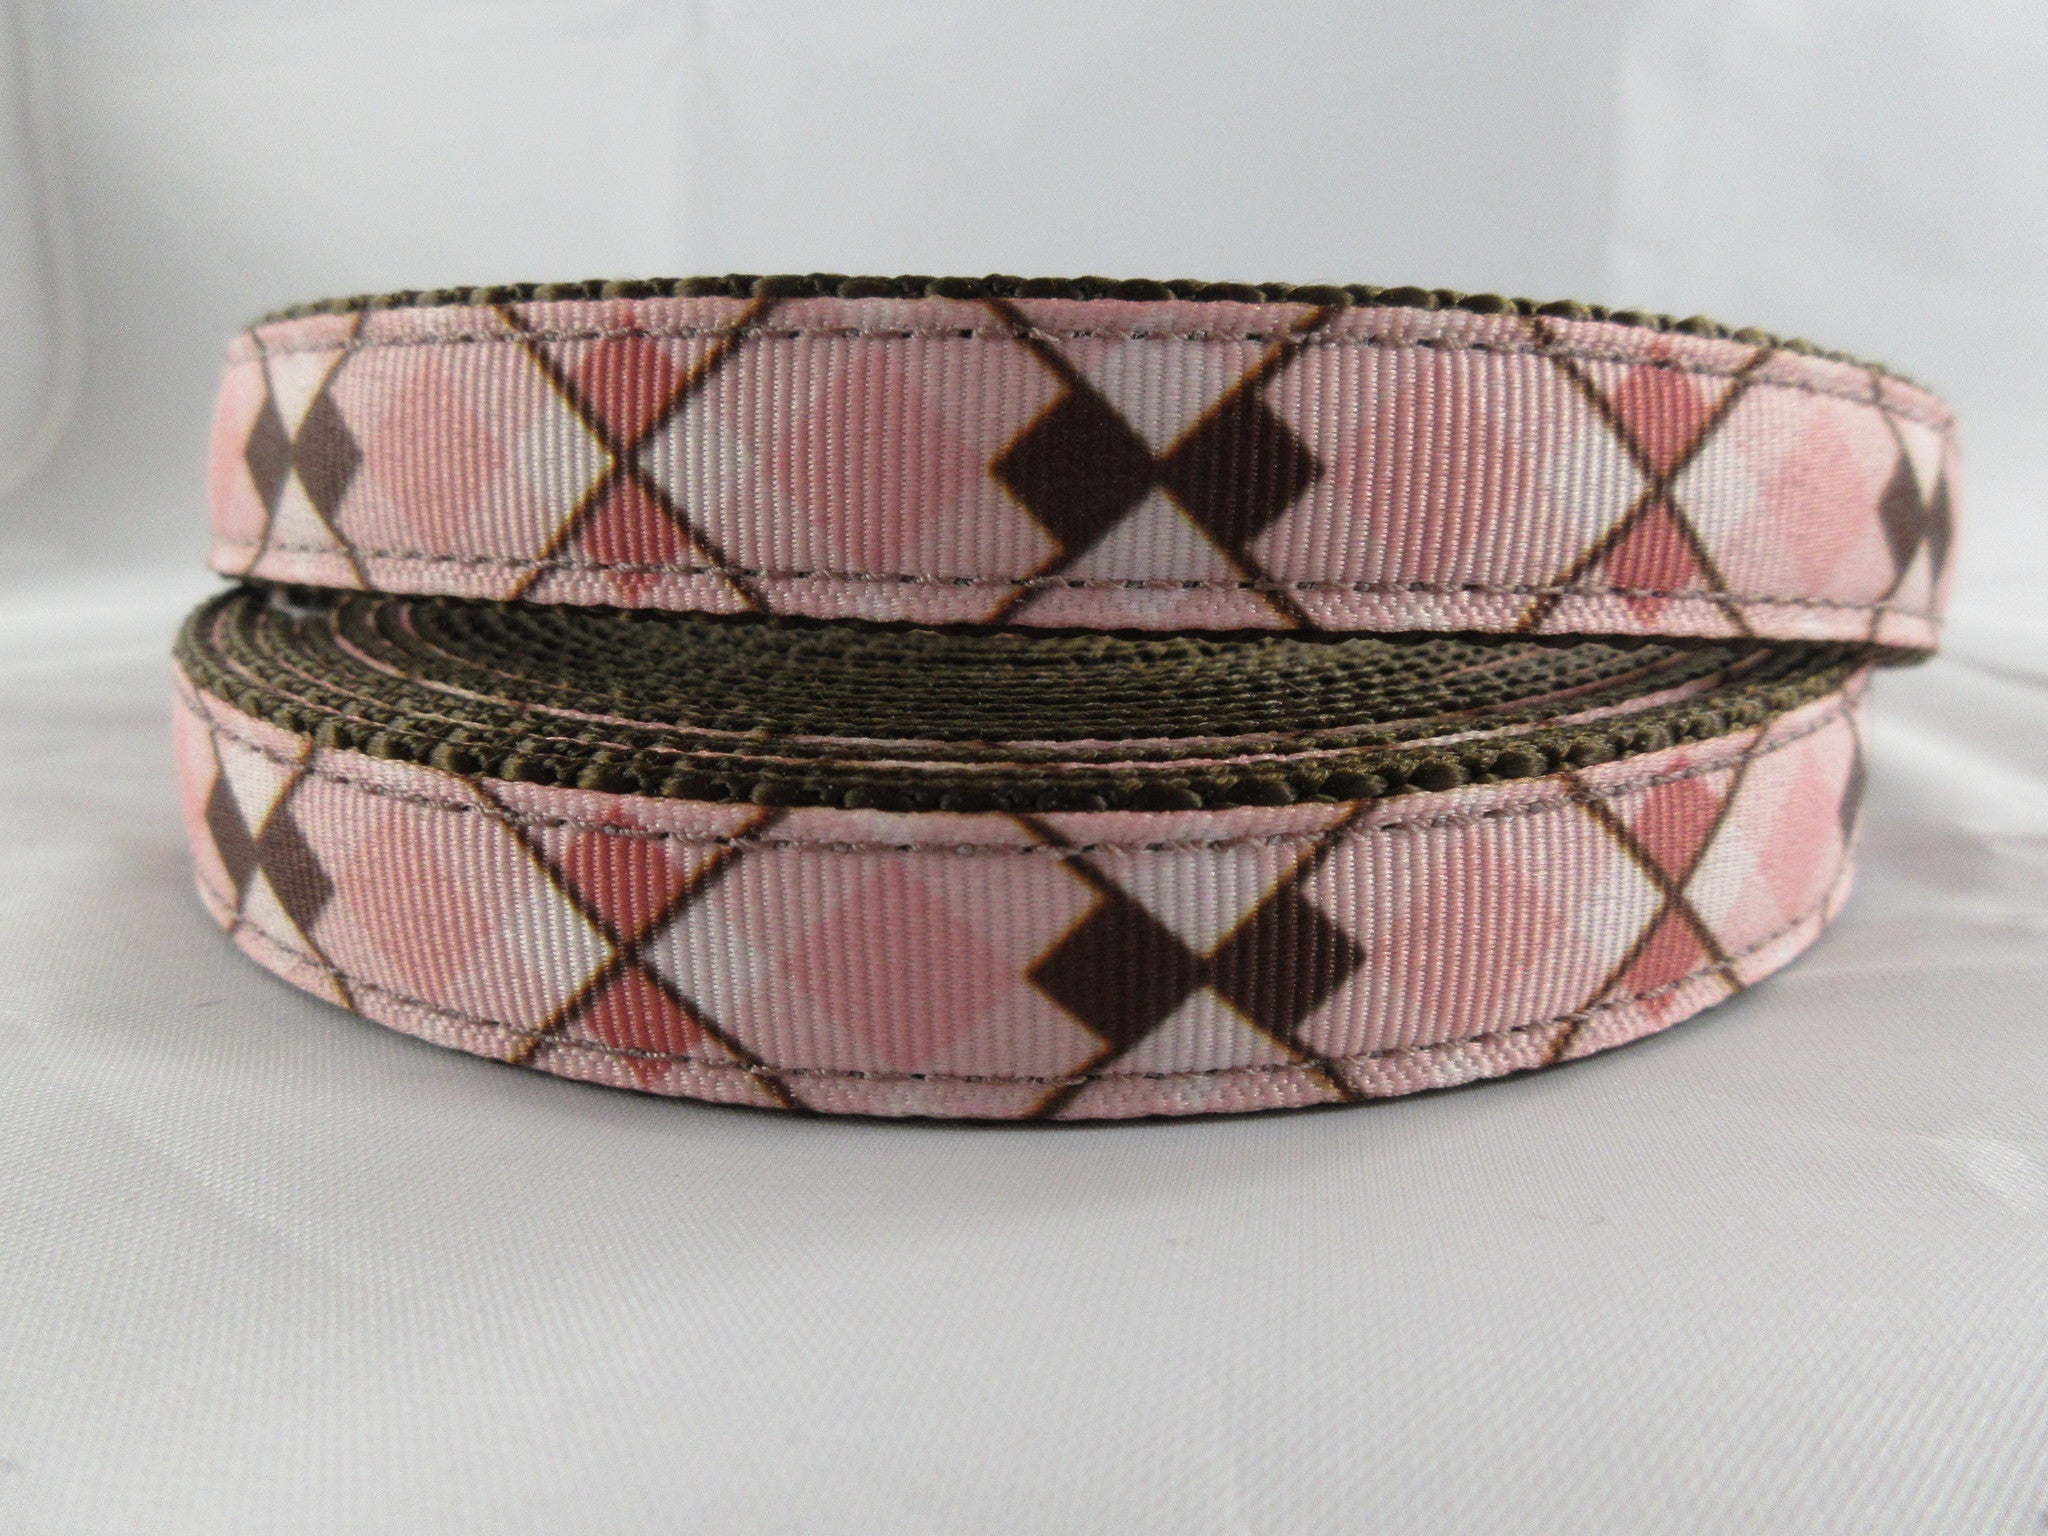 3/4" Pink and Brown Argyle Leash - Penny and Hoover's Pig Pen